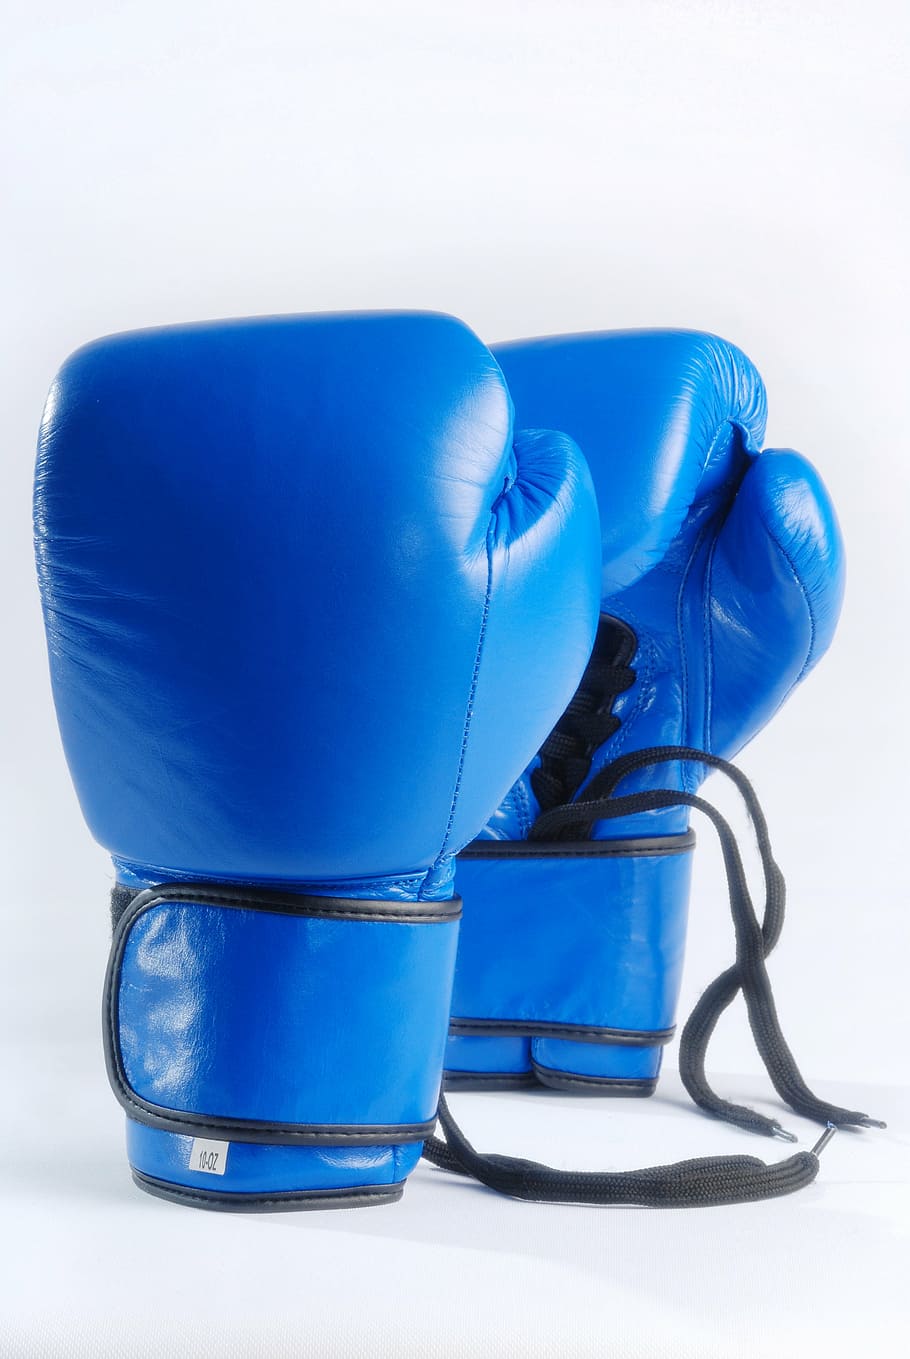 pair, blue, boxing gloves, blue boxing gloves, isolated on white background, fight, sport, boxing, equipment, competition